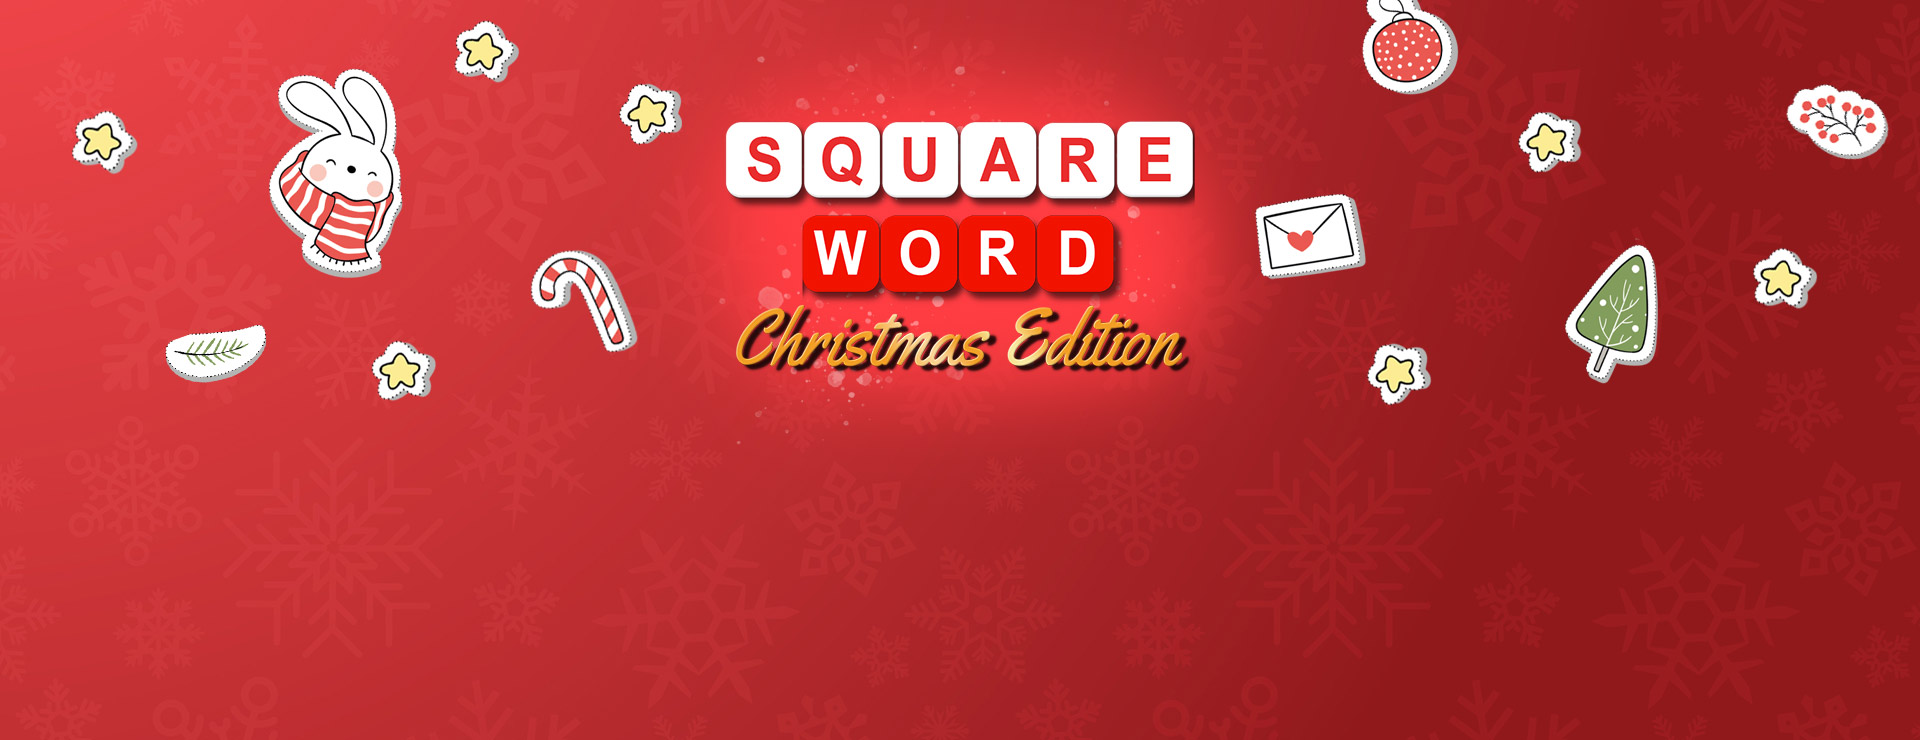 Square Word: Christmas Edition - Puzzle Game